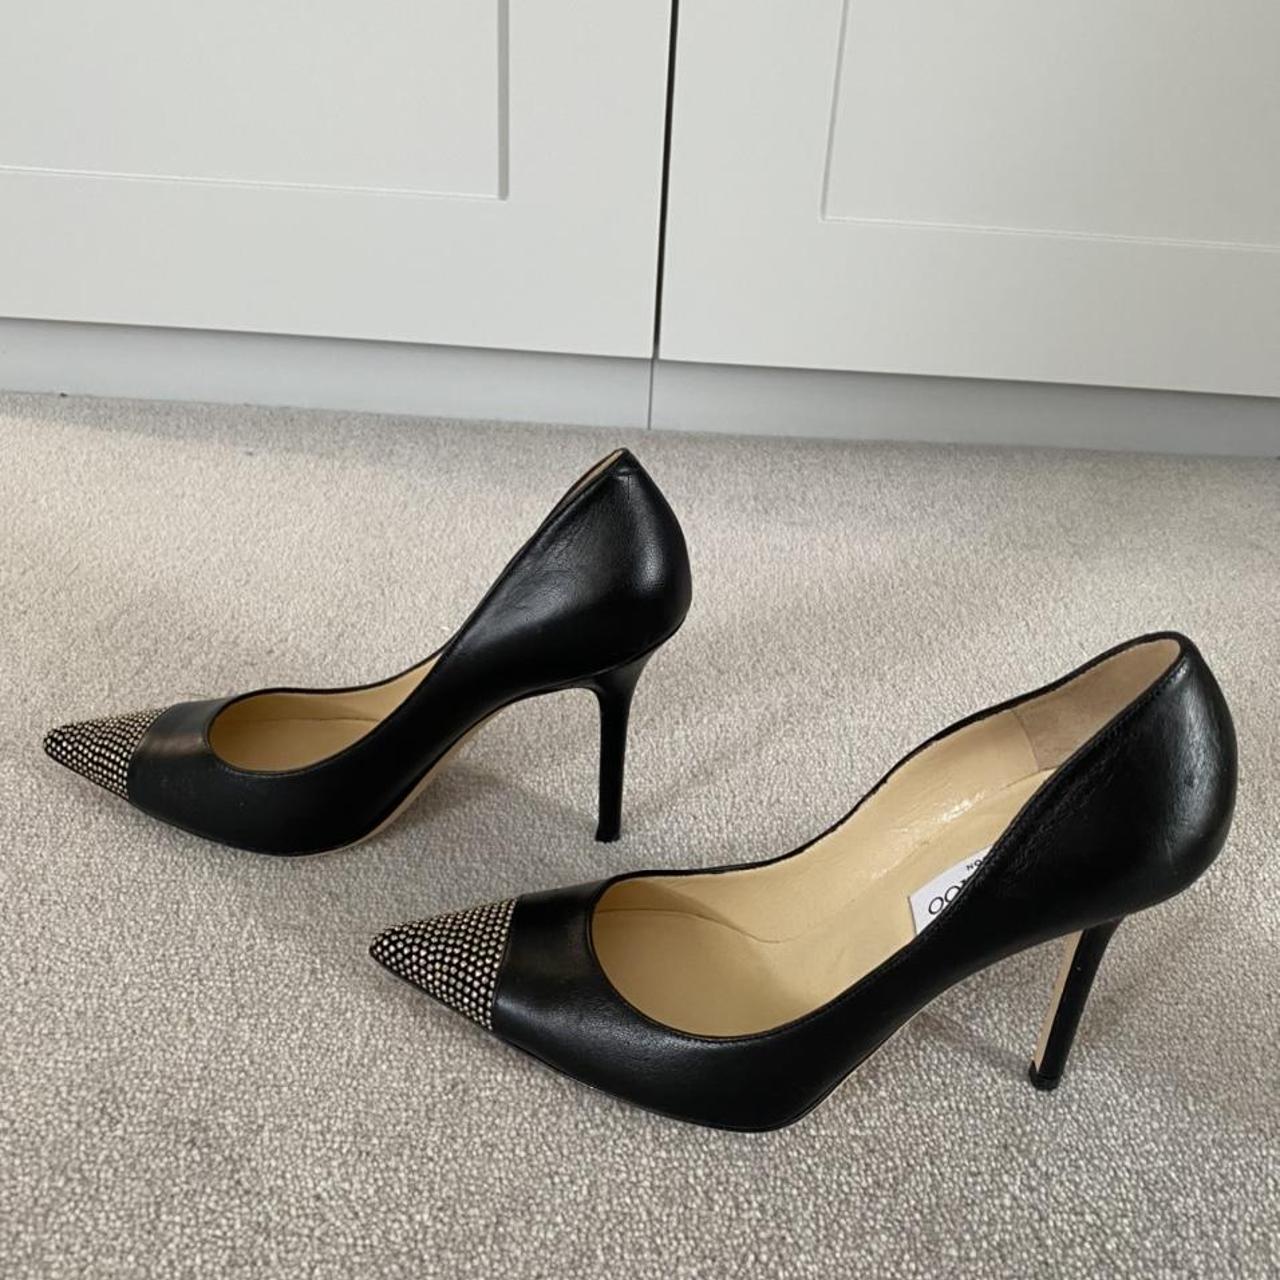 Jimmy choo black leather court shoes Brand new... - Depop